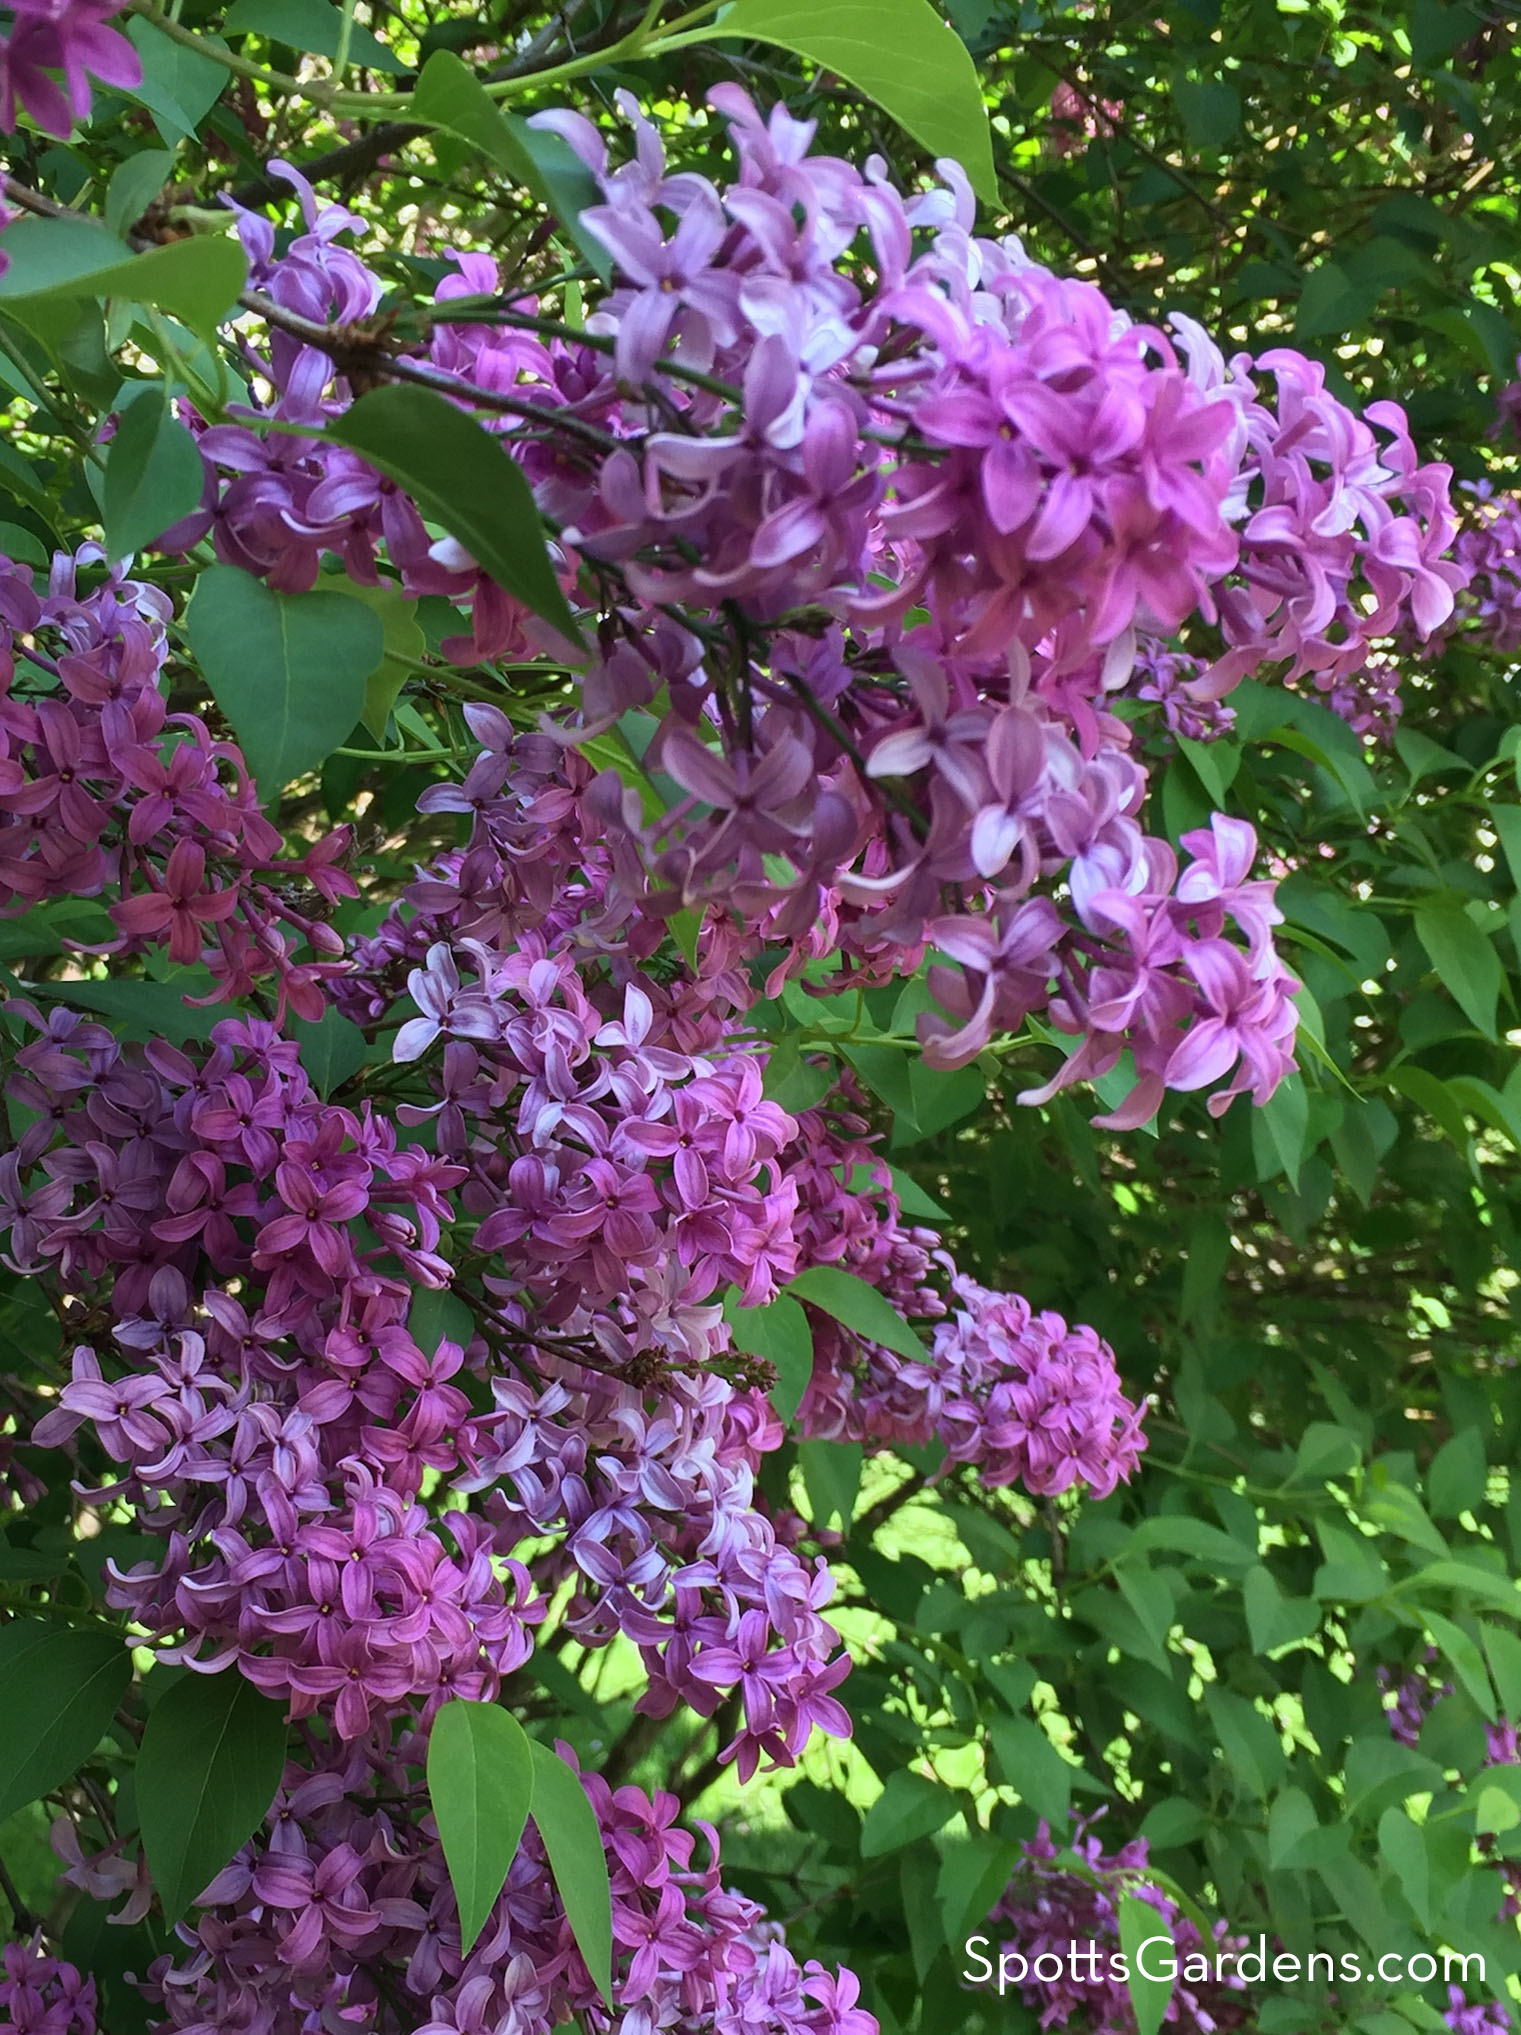 Lilacs should be pruned after they bloom